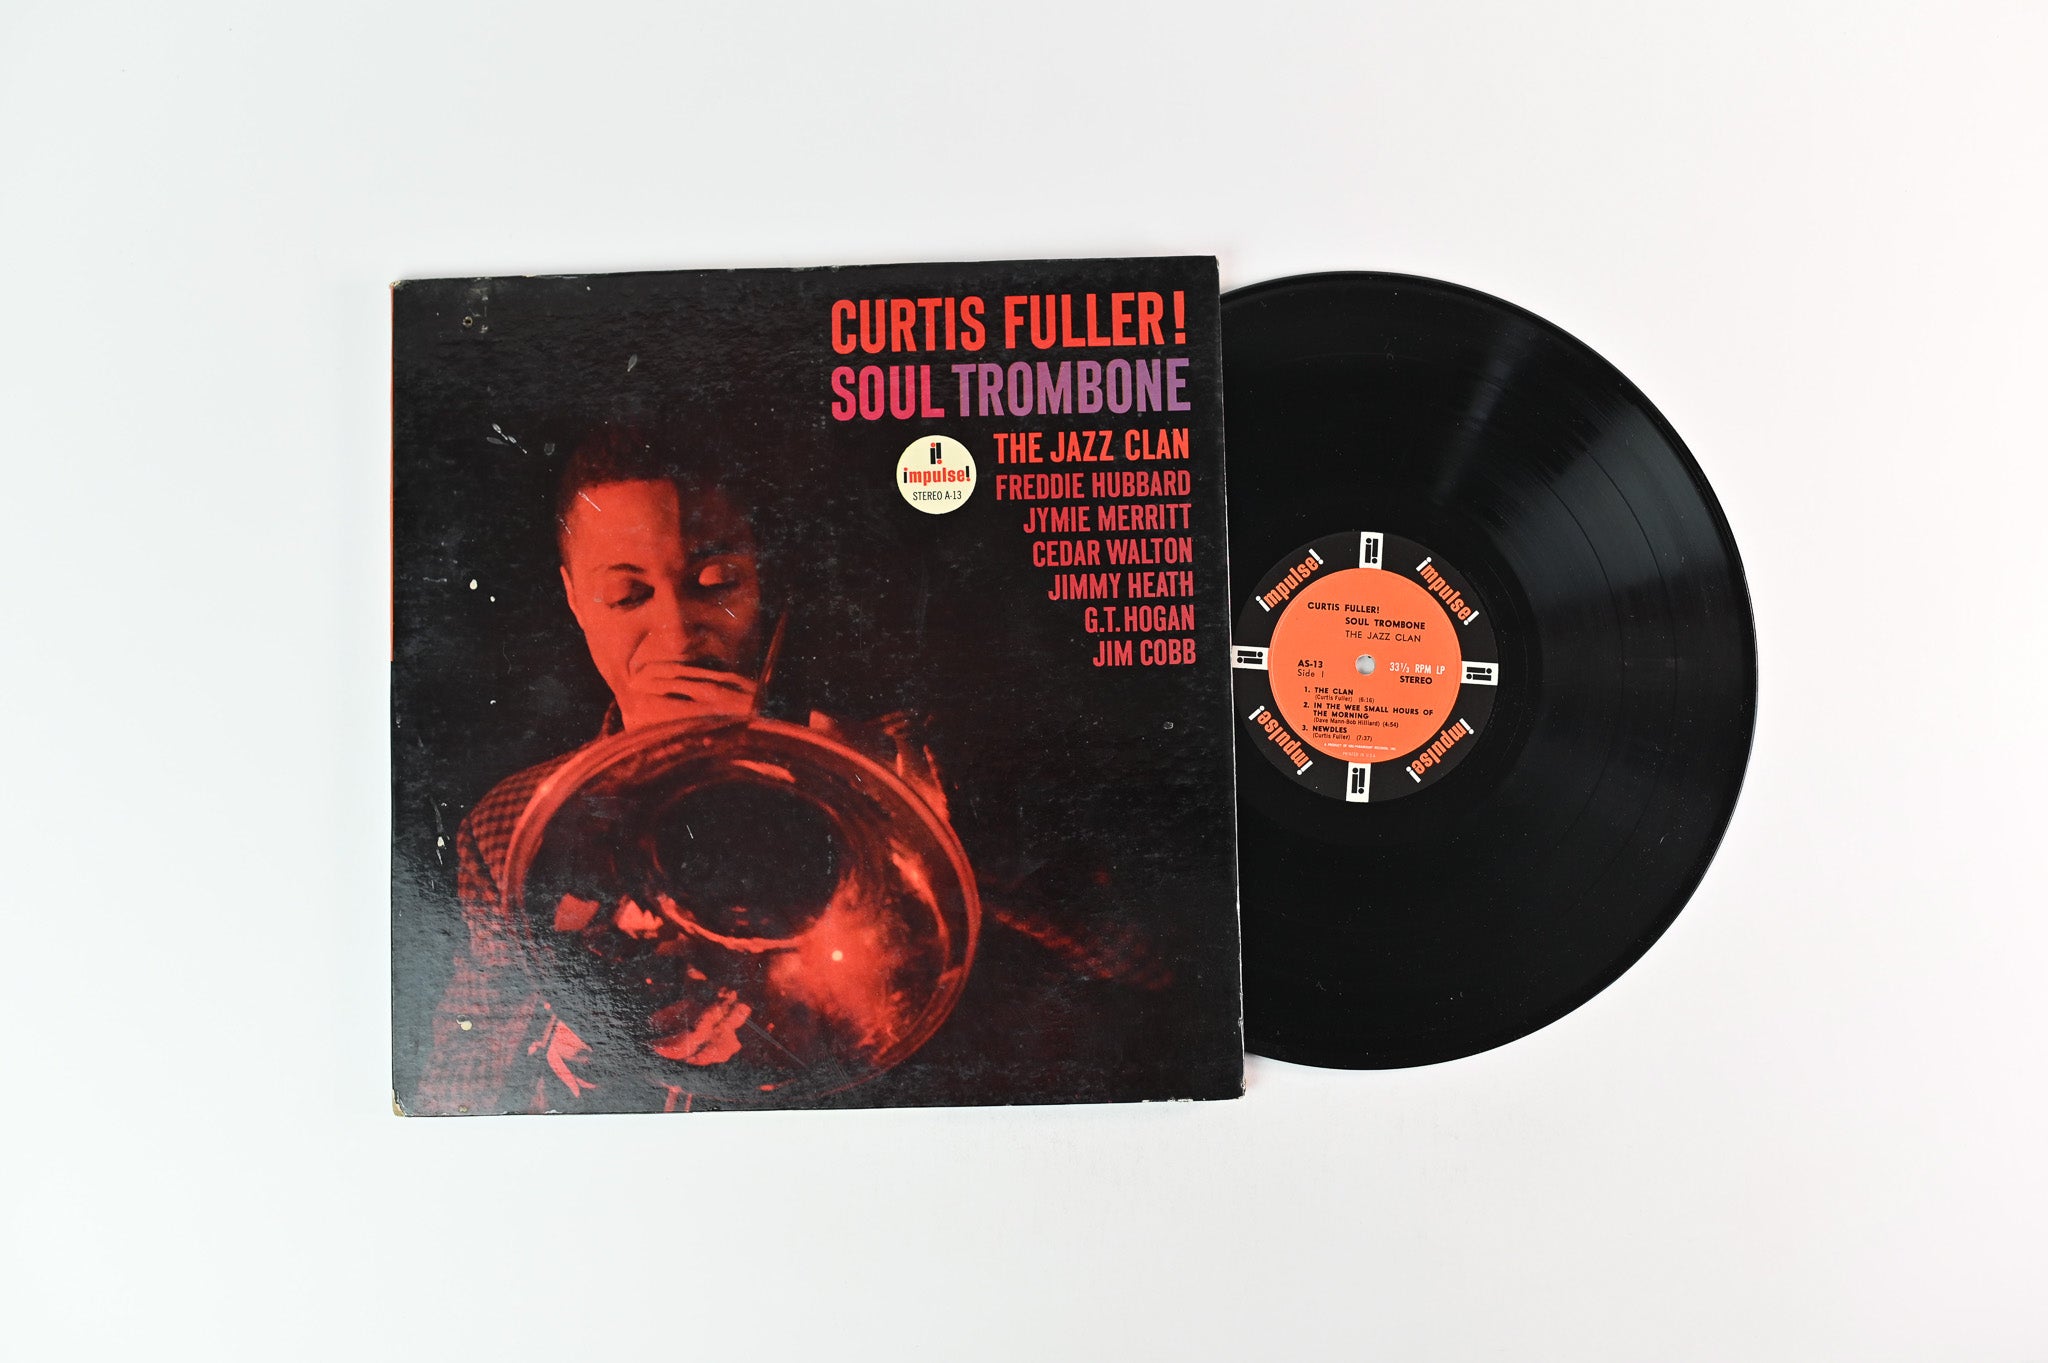 Curtis Fuller - Soul Trombone And The Jazz Clan on Impulse Stereo